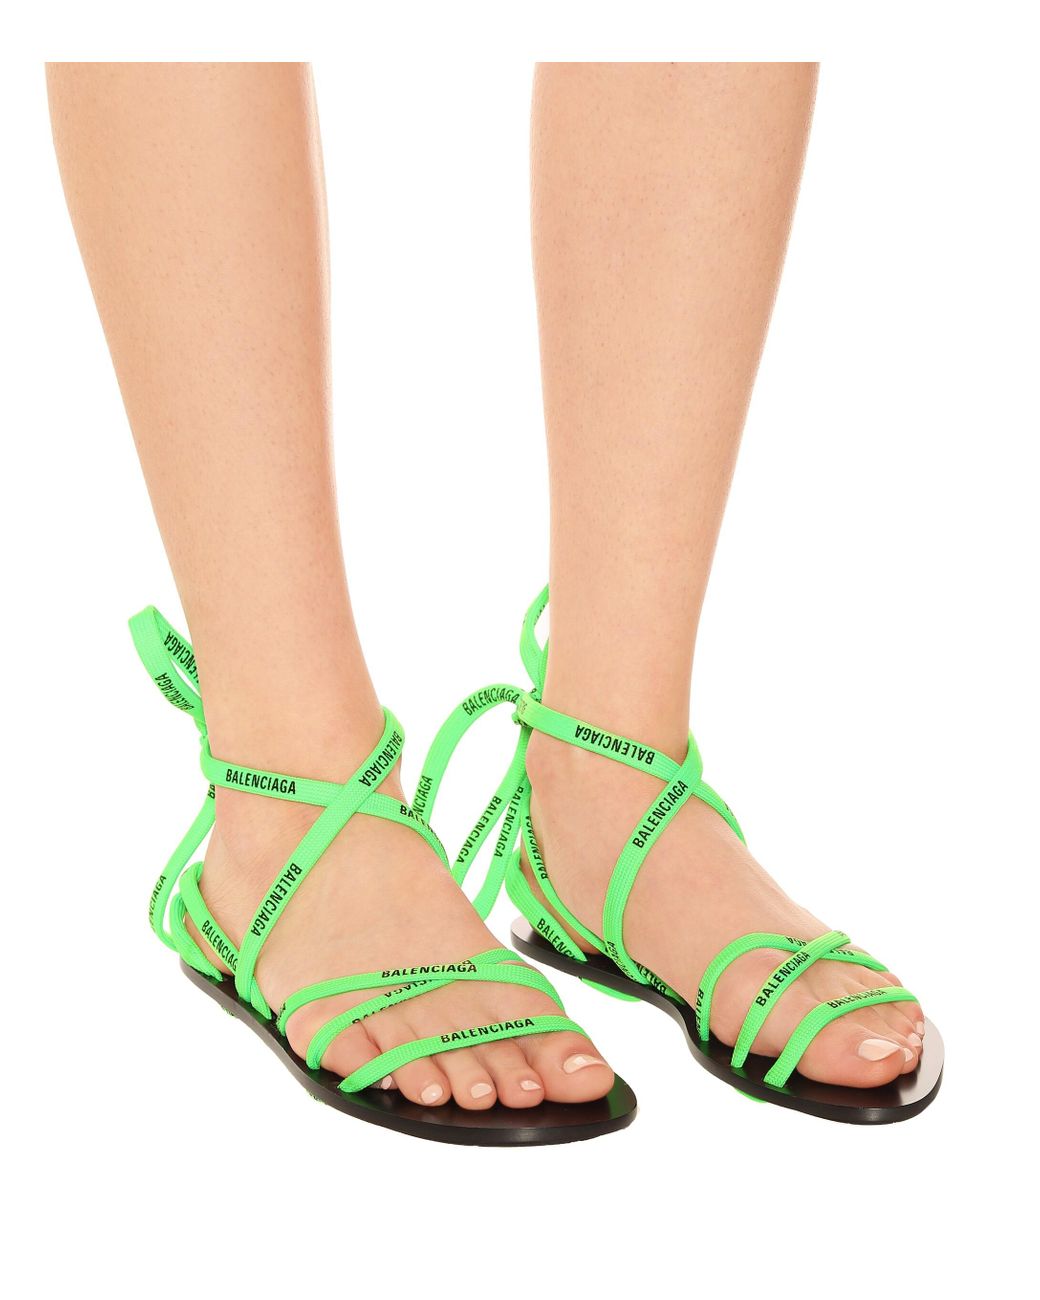 Balenciaga Lace-up Sandals in Green | Lyst